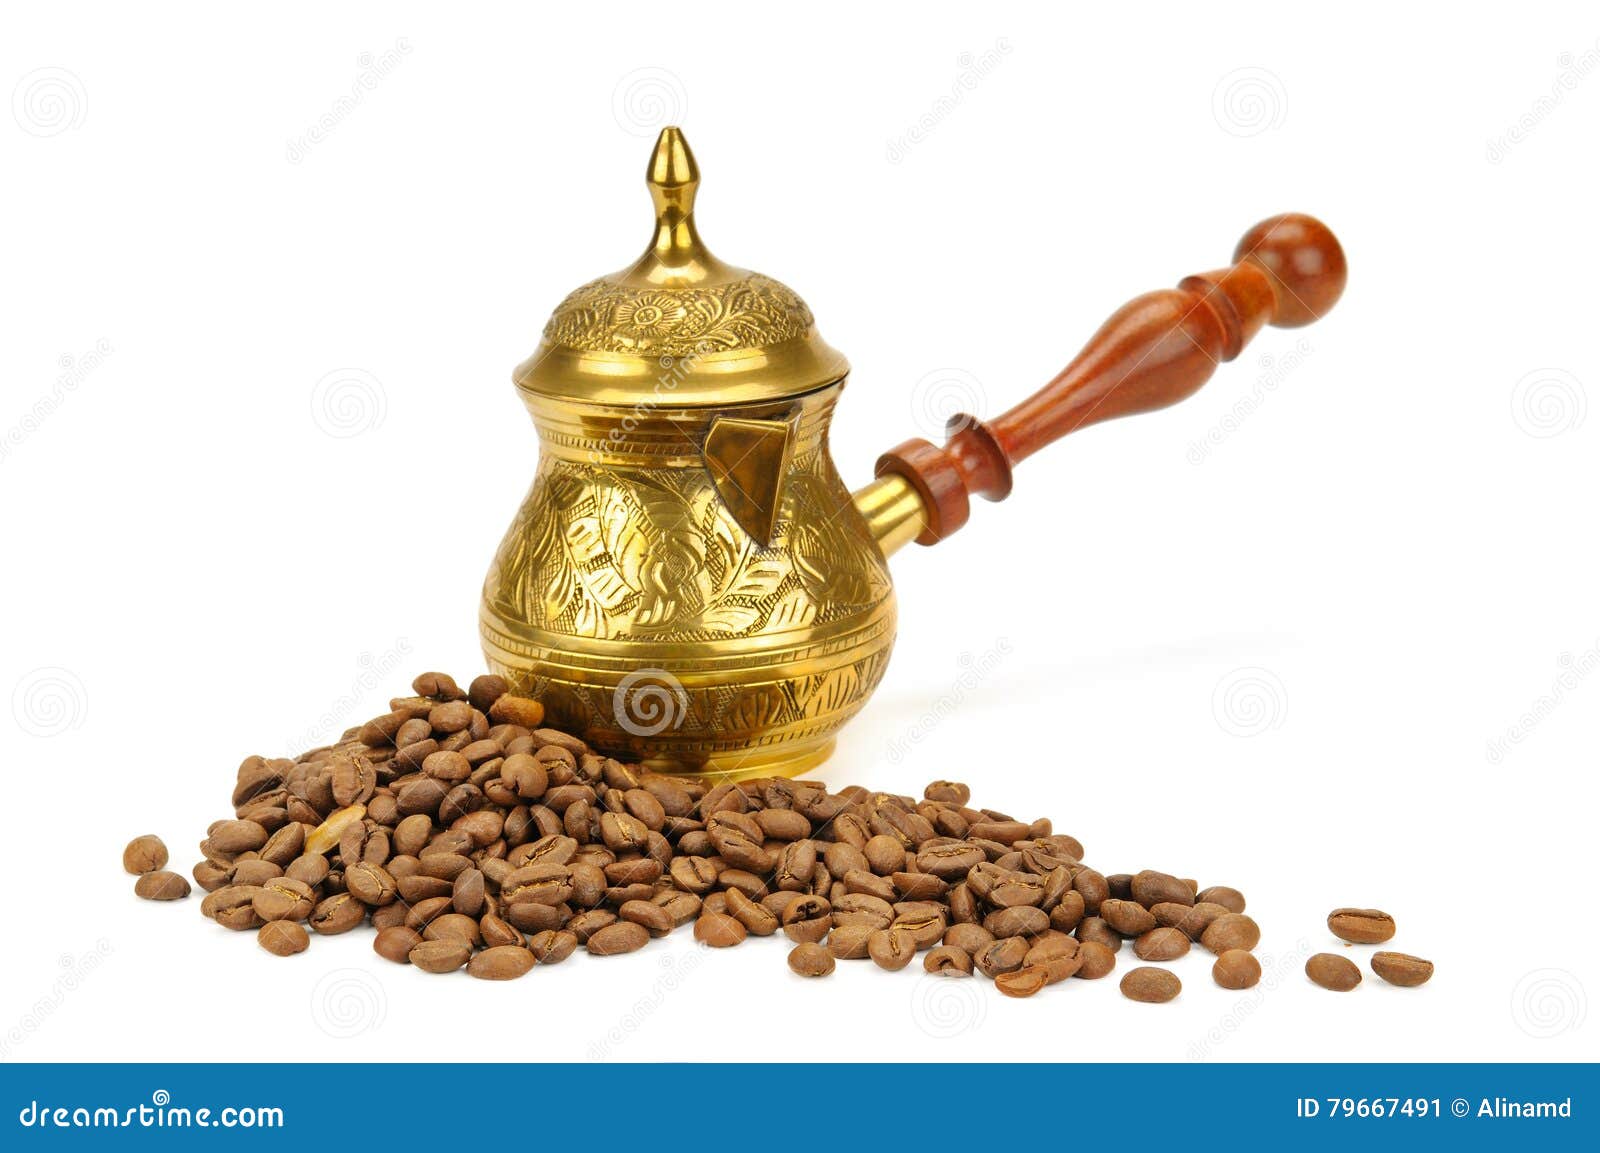 coffeepot and coffee beans on white background